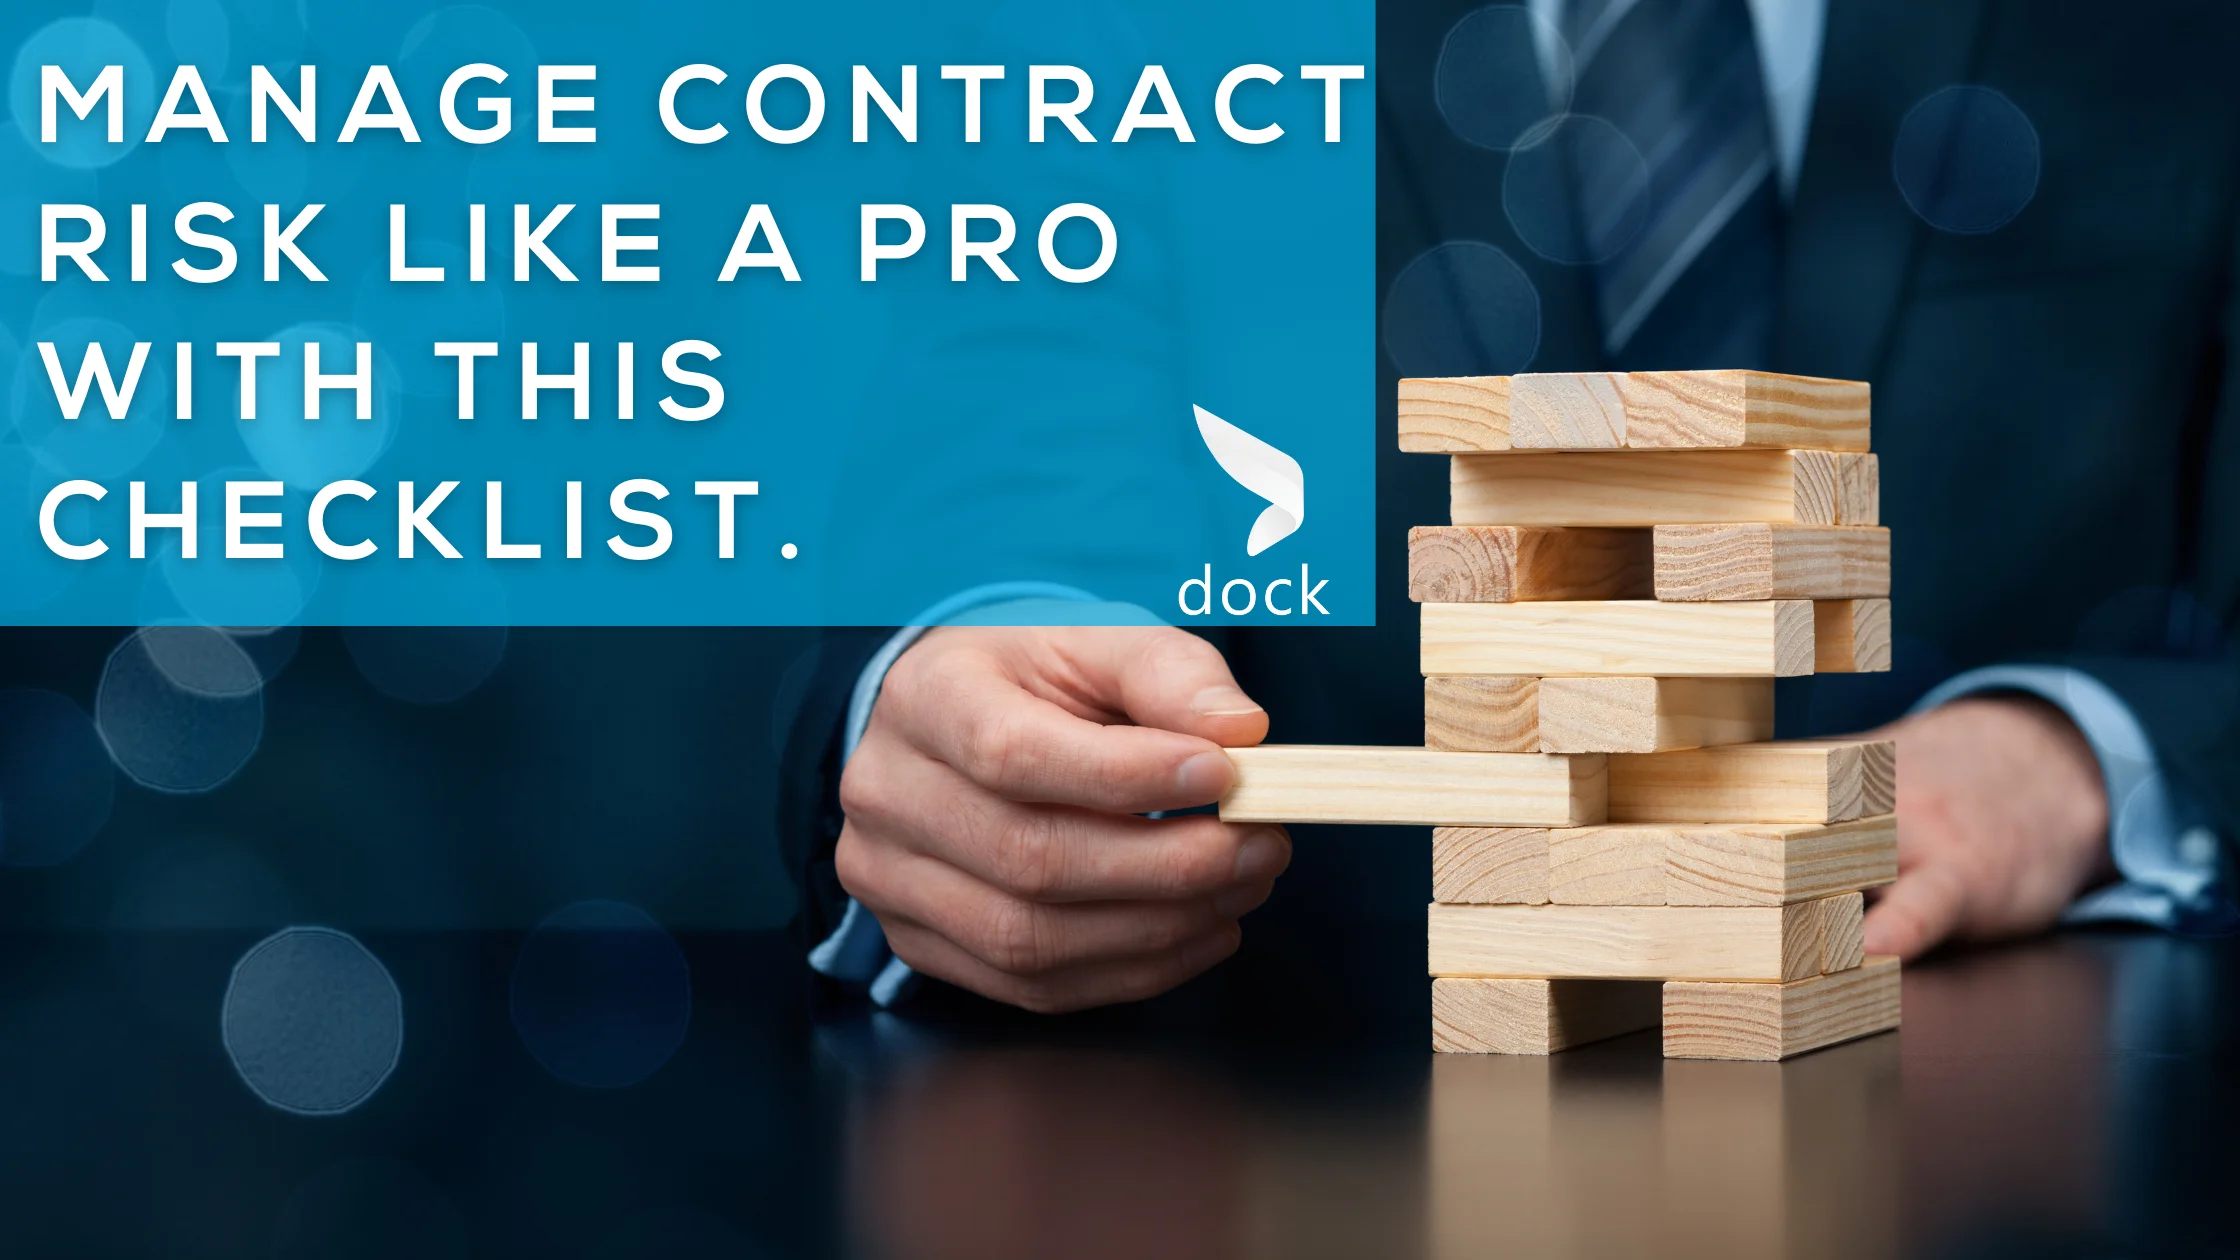 Manage contract risk like a pro with this checklist.